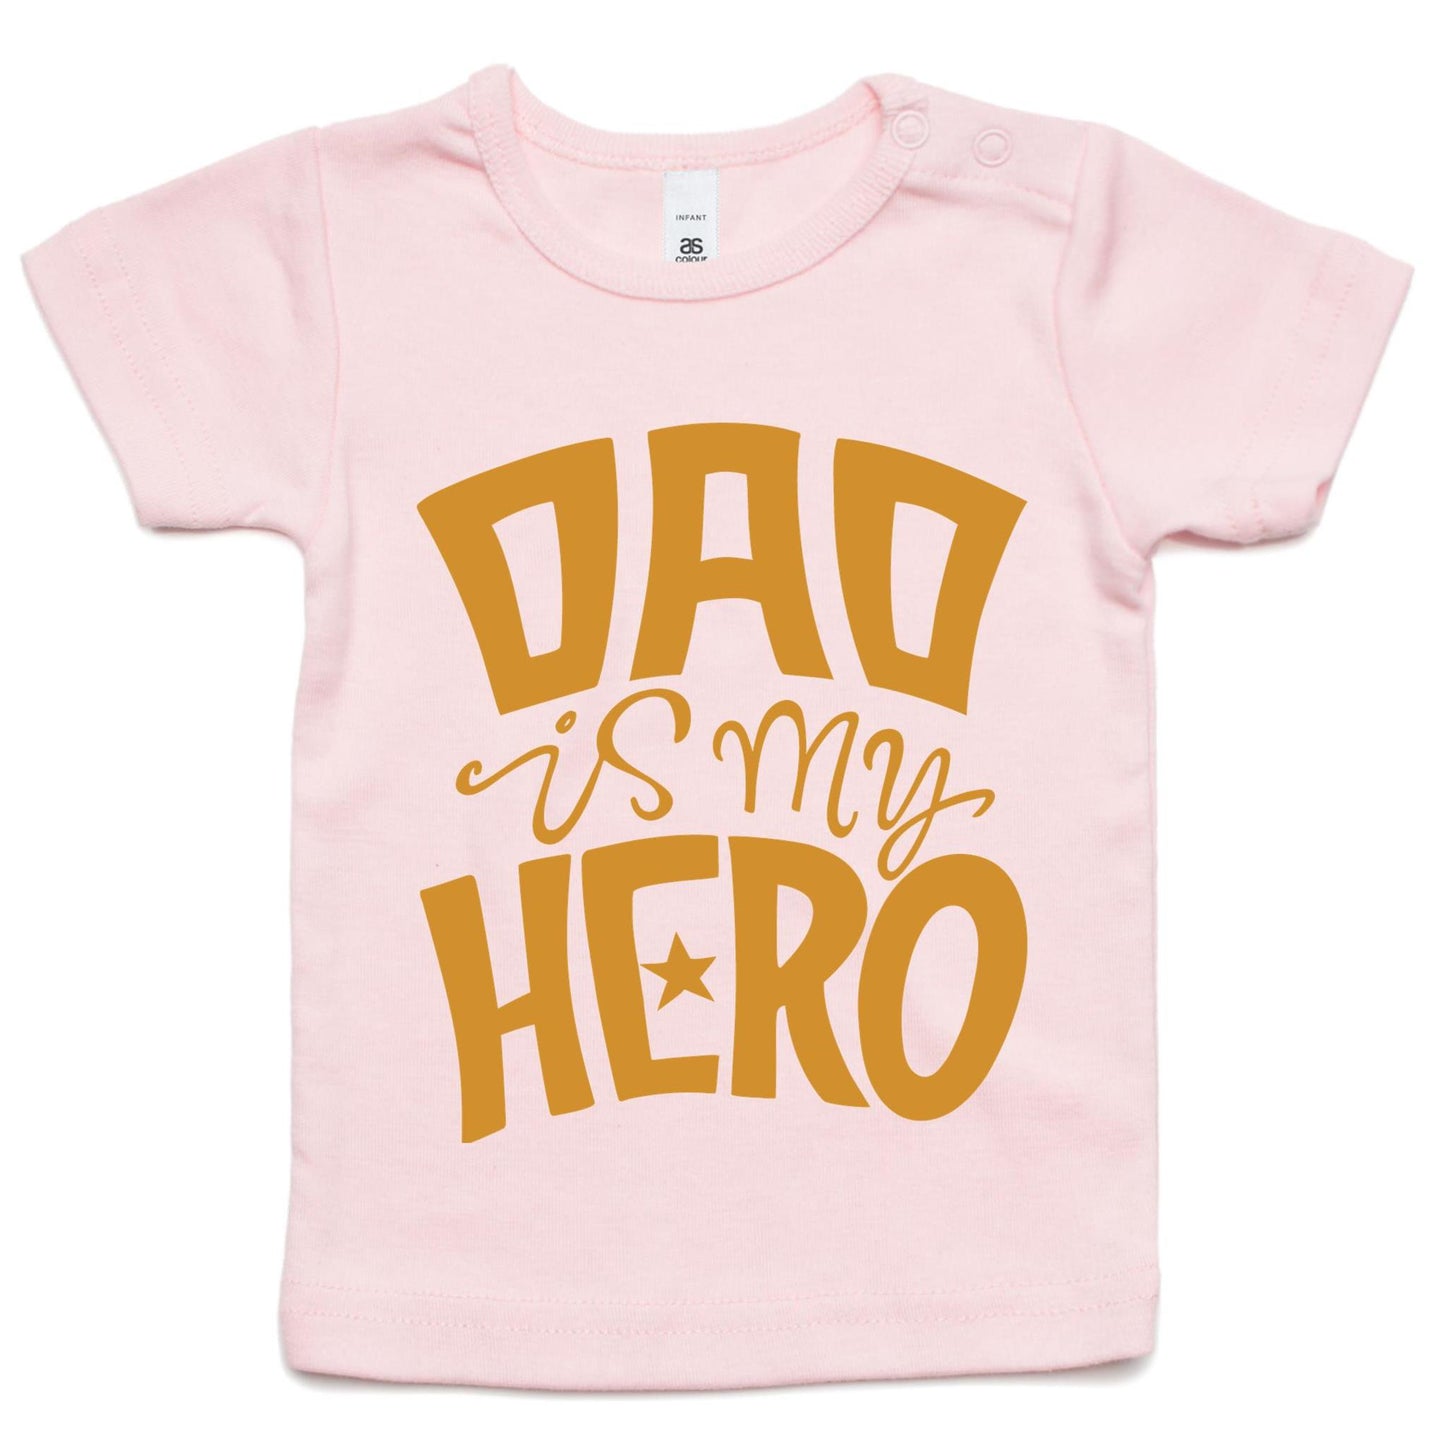 Dad Is My Hero - Baby T-shirt Pink Baby T-shirt Dad